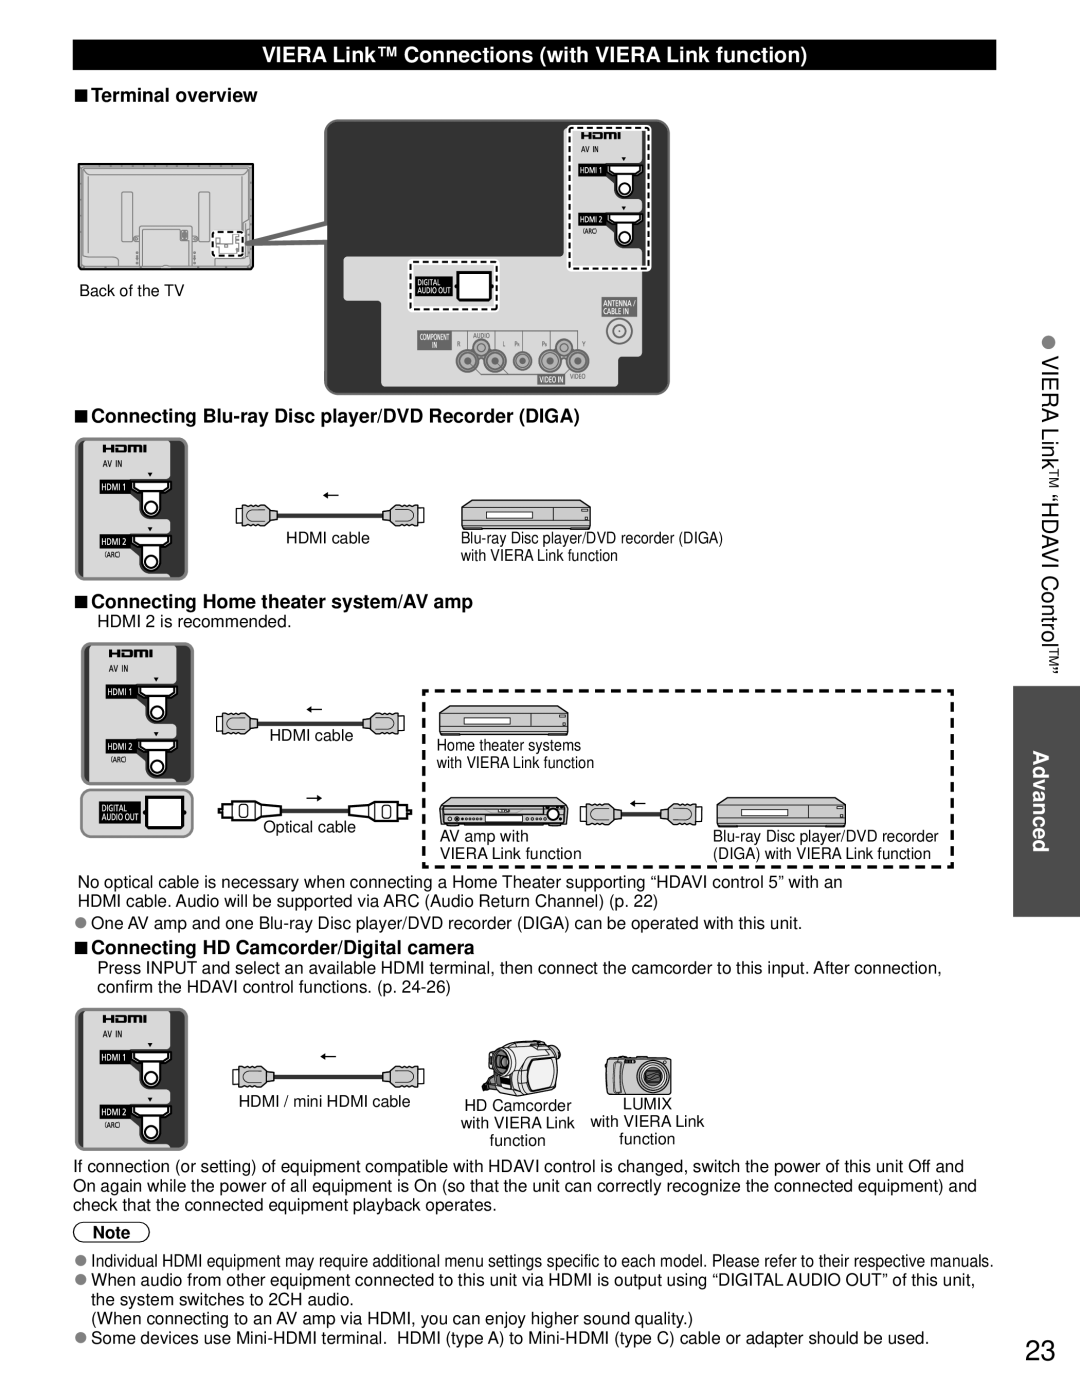 Panasonic TC-P50U50 owner manual VIERA Link Connections with VIERA Link function, Terminal overview 